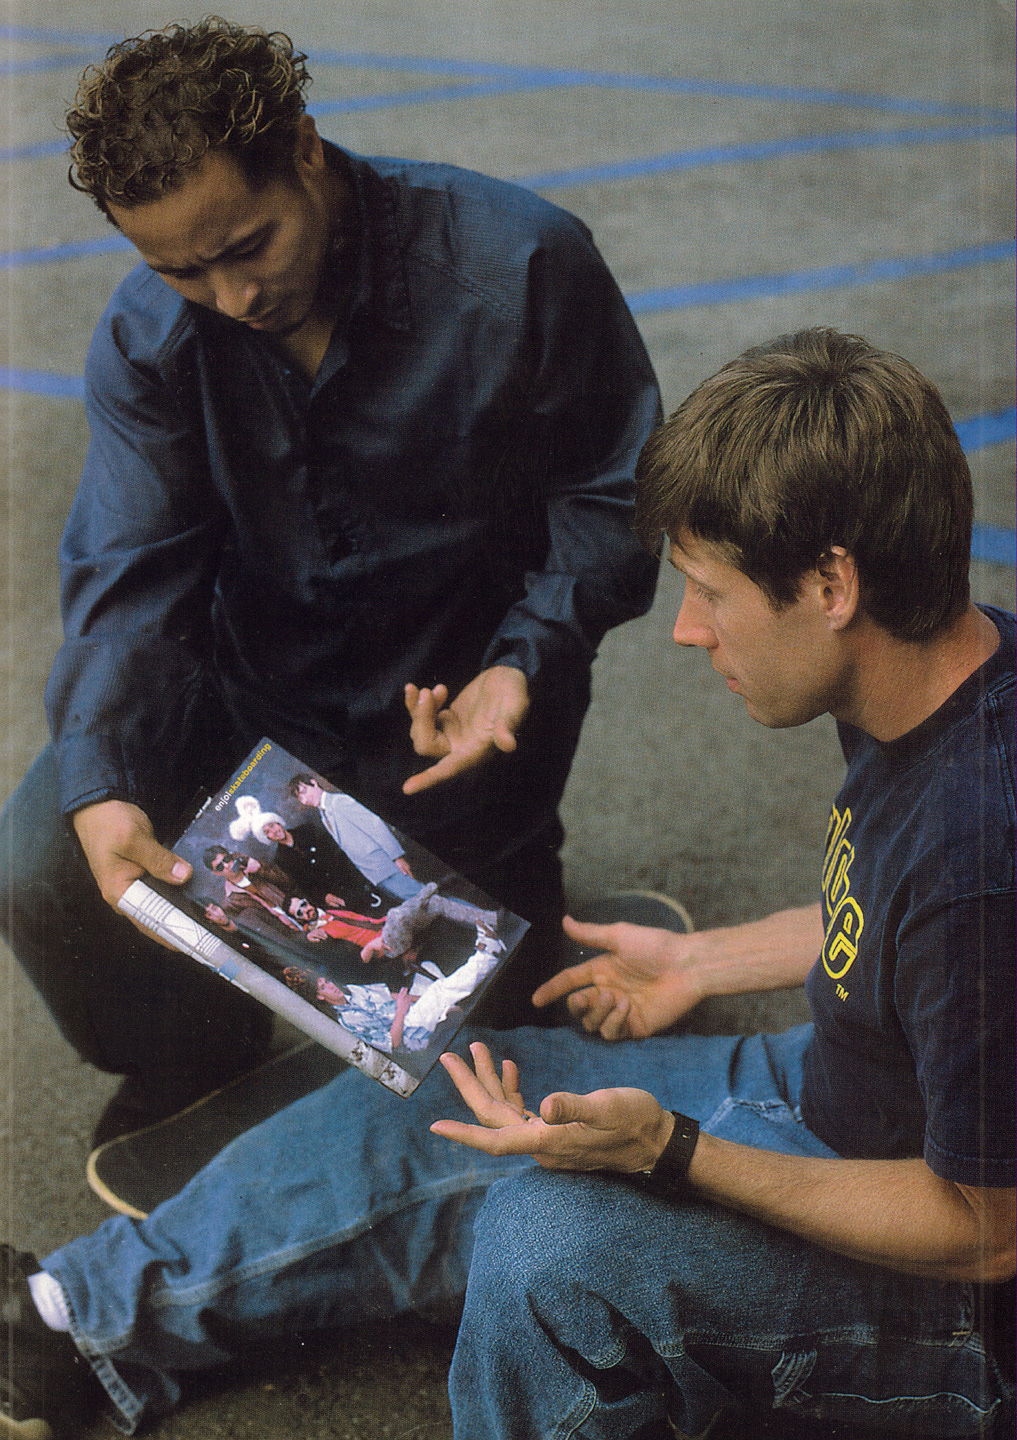 Rodney Mullen and Daewon Song courtesy of Chrome Ball